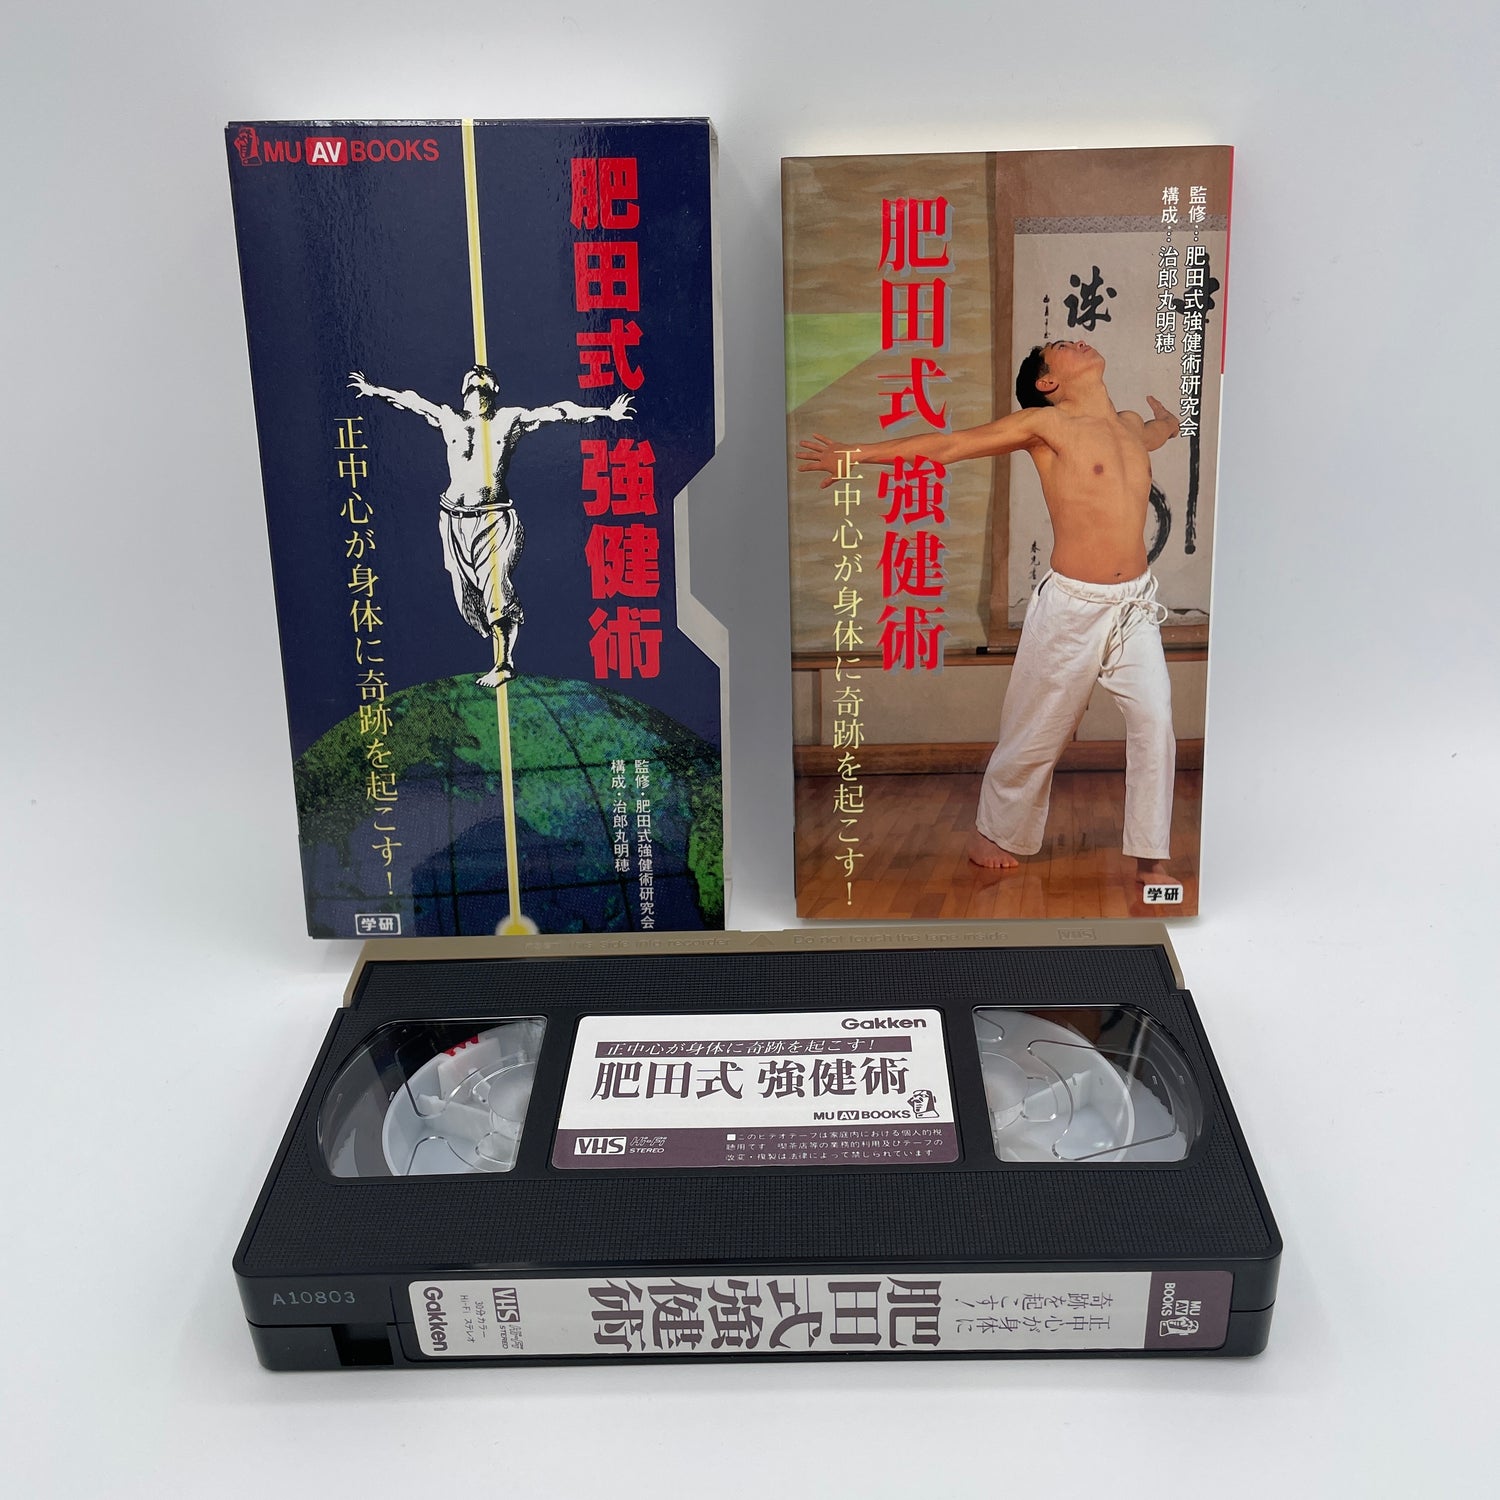 Hida Style Health Techniques Book & VHS by Takahisa Tomita (Preowned)